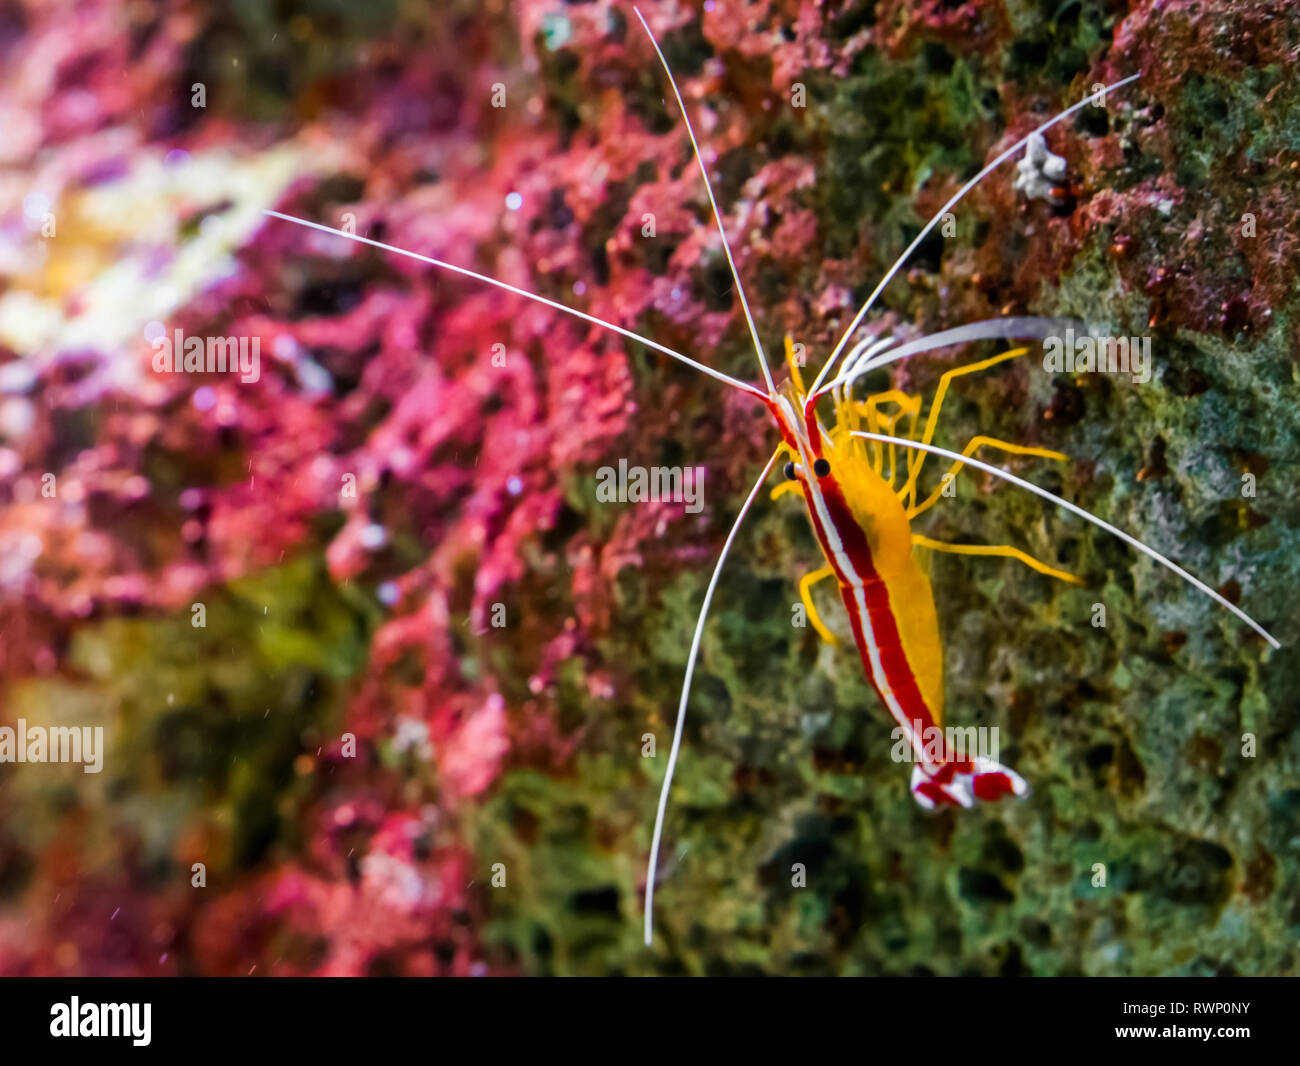 portrait of a atlantic cleaner shrimp sitting on a rock, colorful prawn from the atlantic ocean Stock Photo